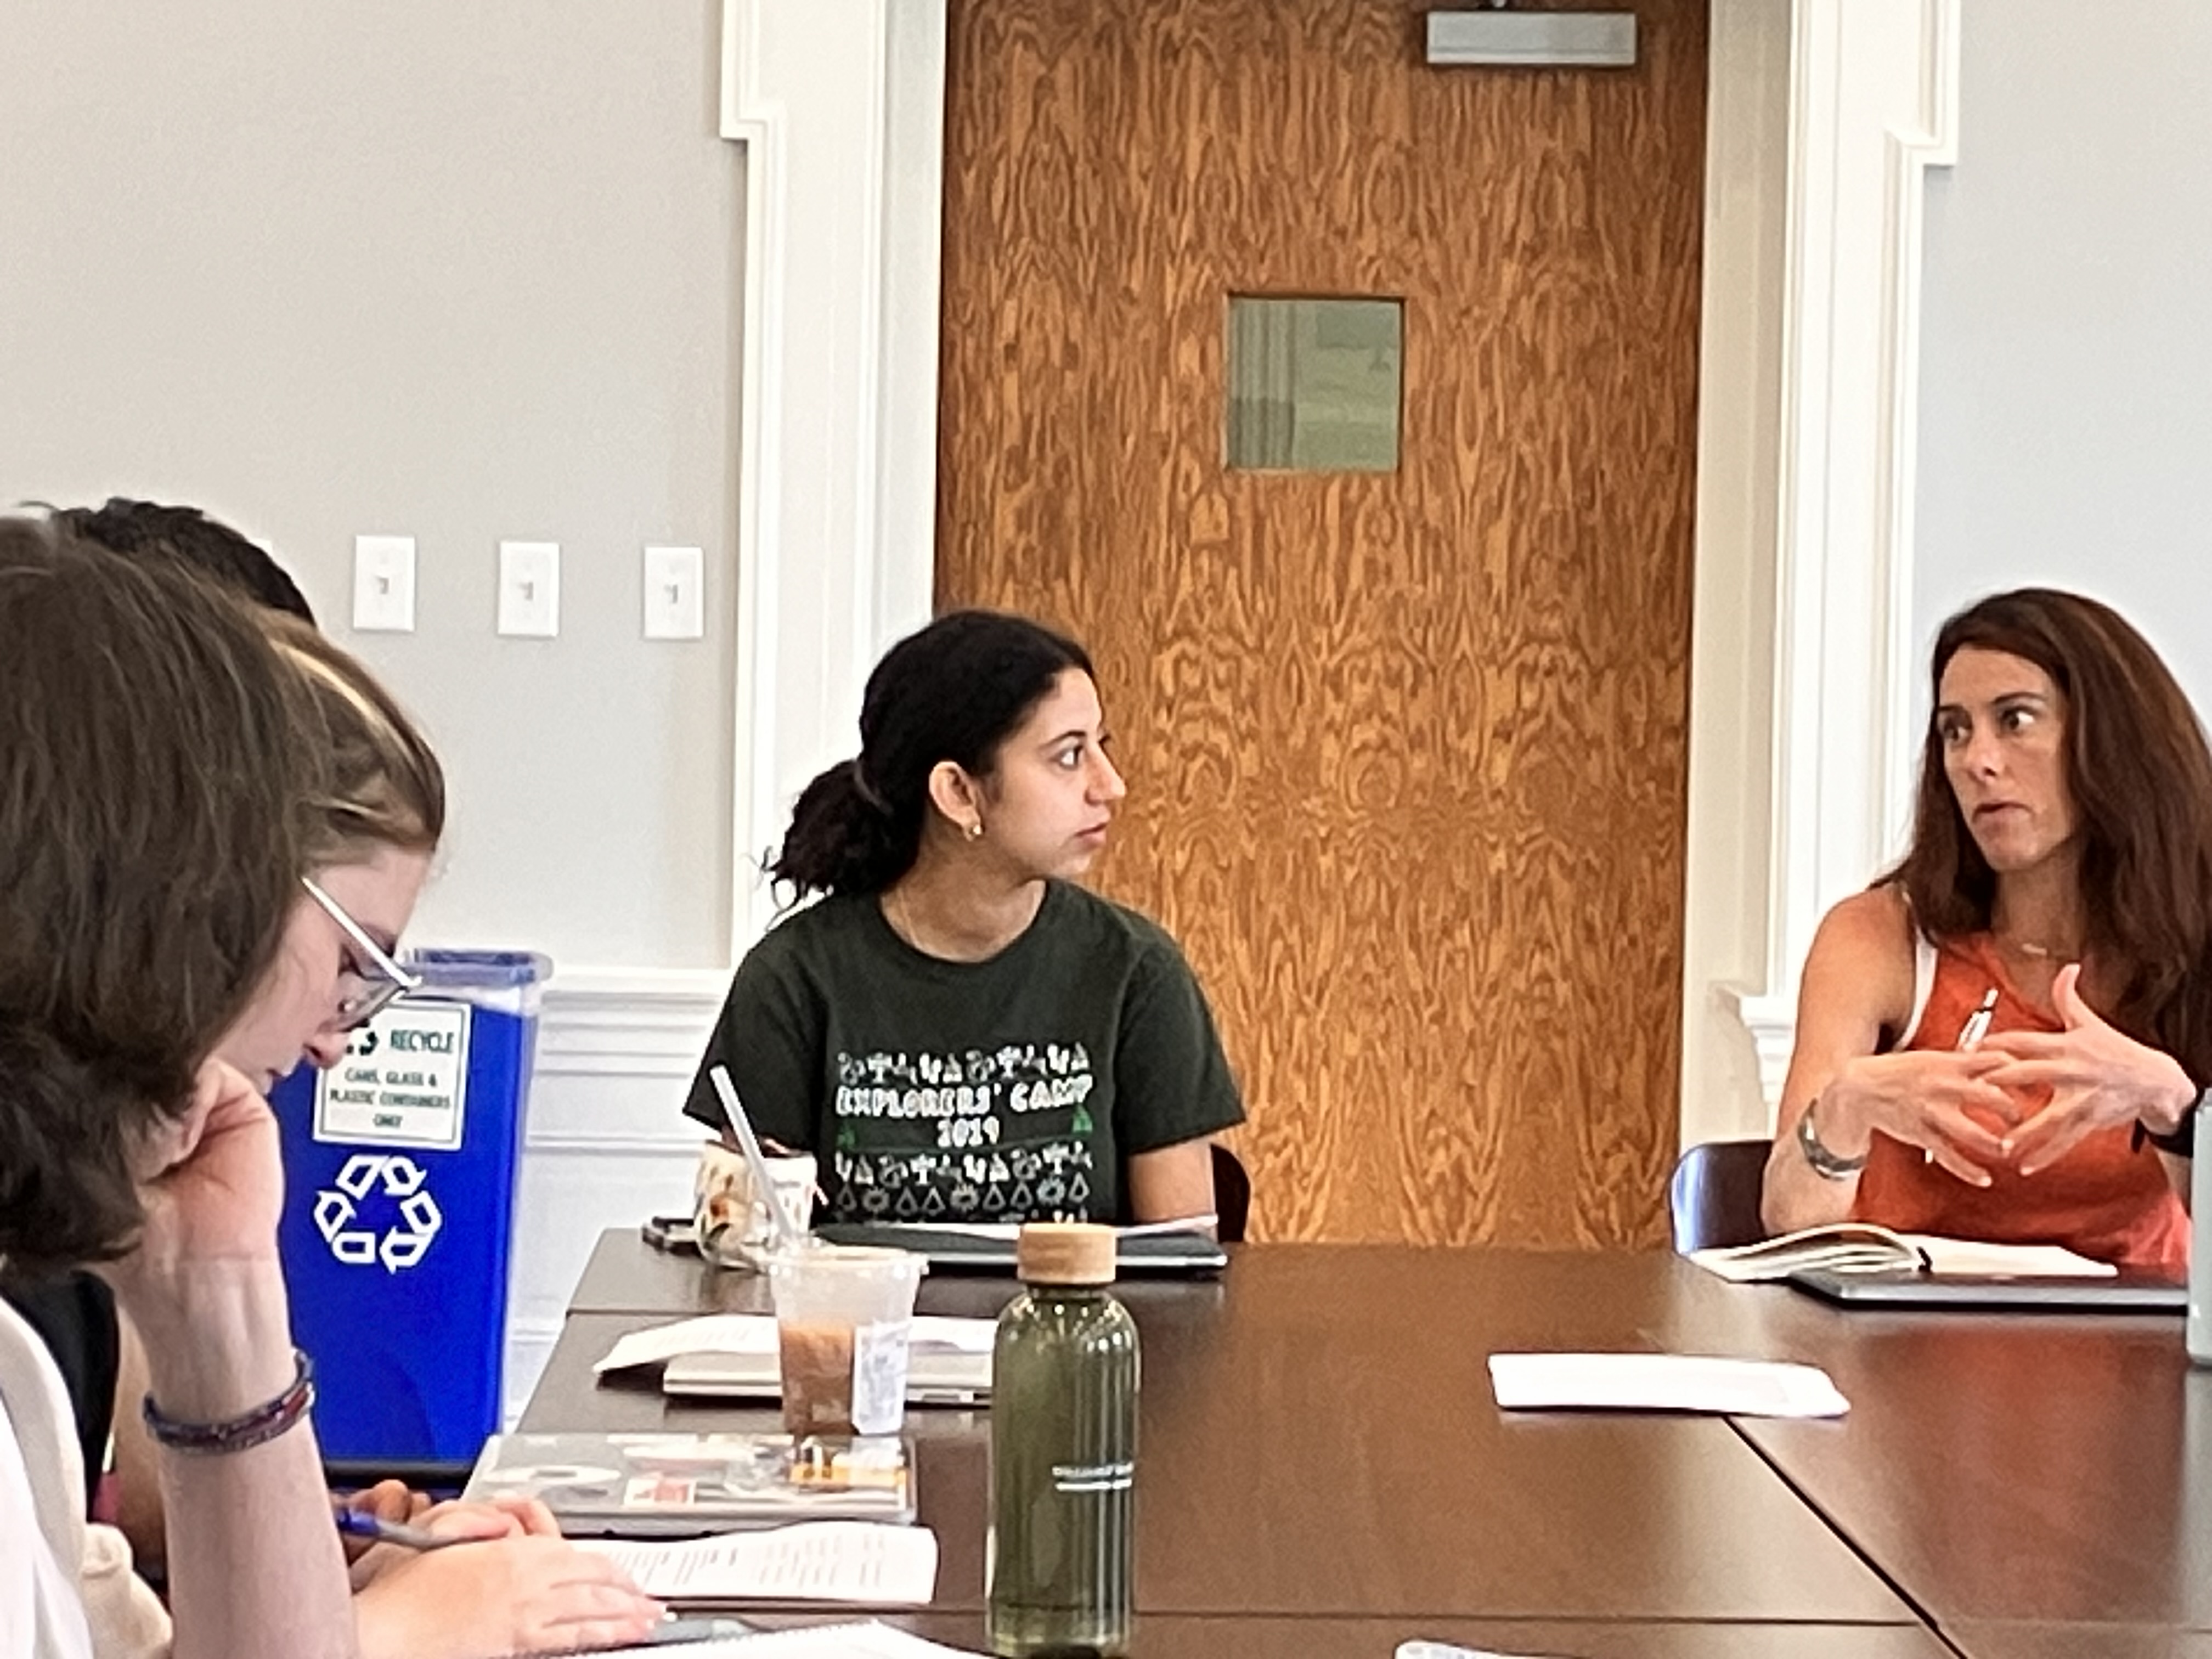 Phebe Fahmy '26 discusses the writer's craft with Sharp Journalism instructor Stephanie Hanes, staff writer for the Christian Science Monitor.  (photo by Charles Center staff).